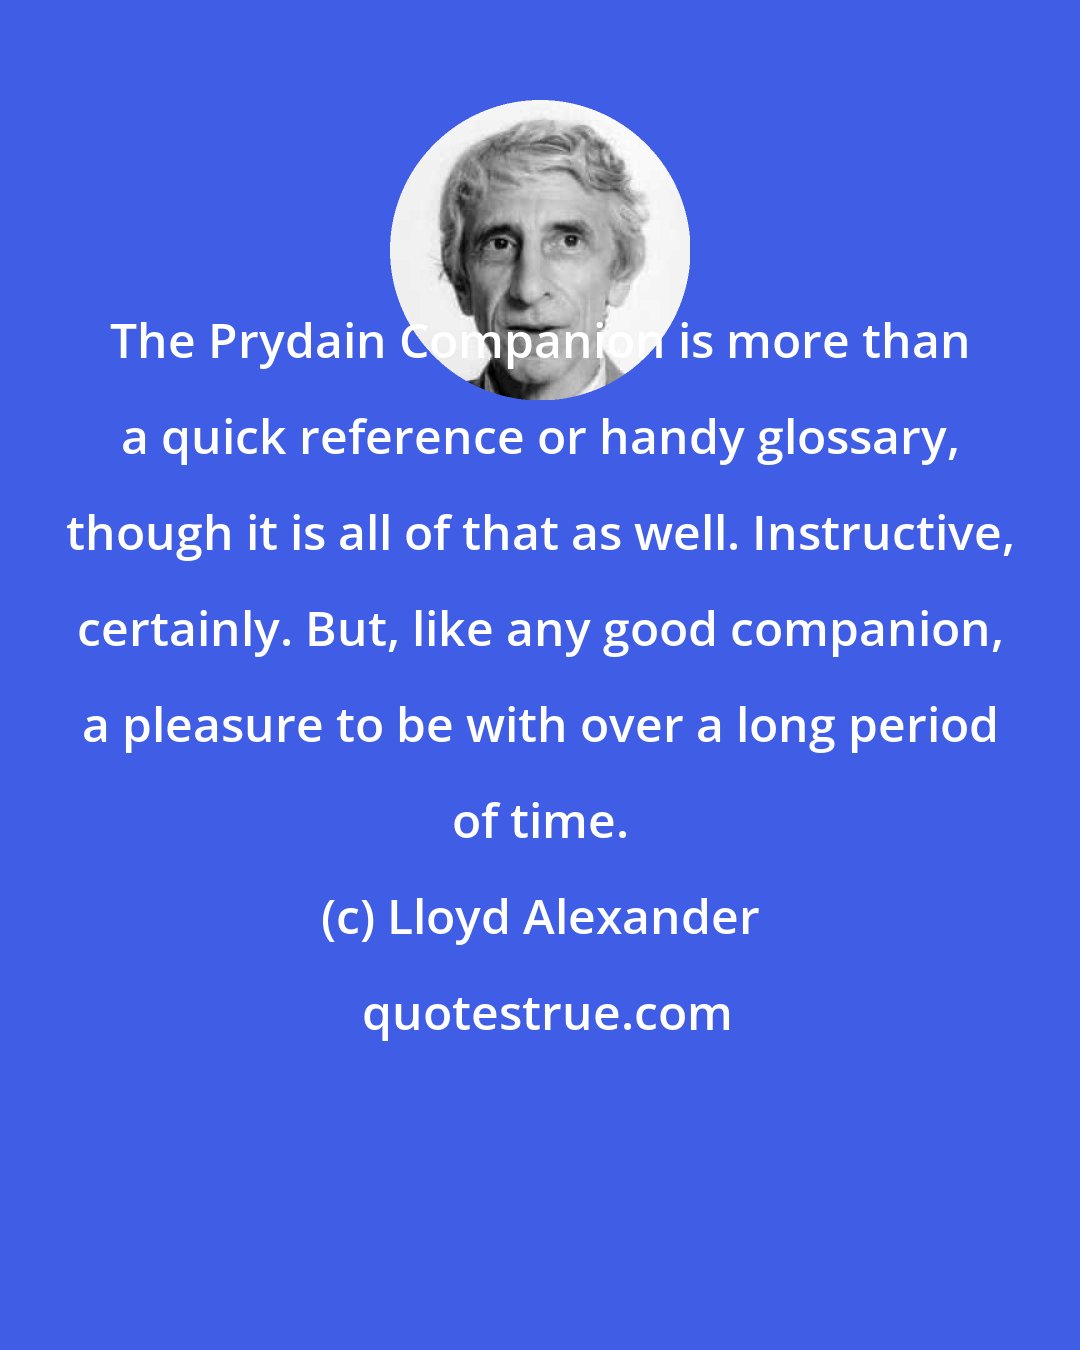 Lloyd Alexander: The Prydain Companion is more than a quick reference or handy glossary, though it is all of that as well. Instructive, certainly. But, like any good companion, a pleasure to be with over a long period of time.